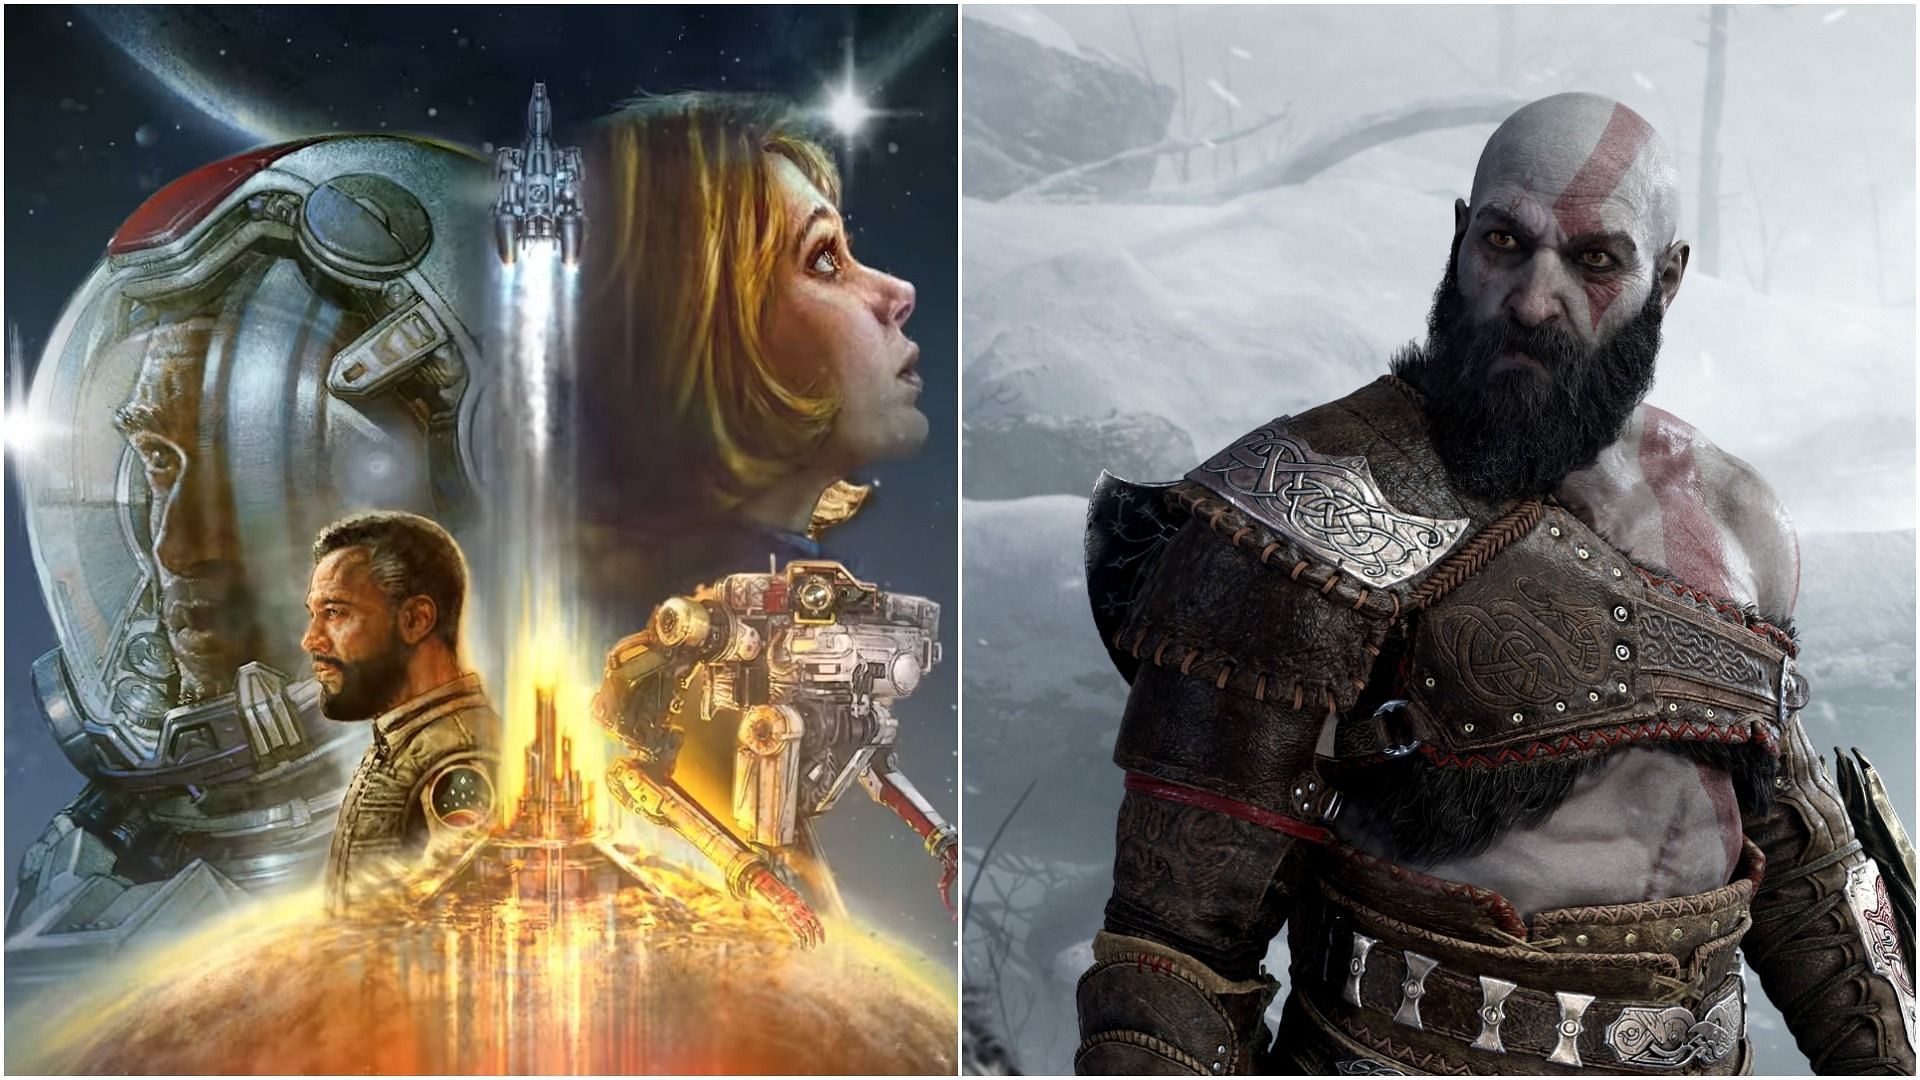 God of War Ragnarok and Starfield are two major games set to be released in 2022 (Images via Bethesda, Sony)